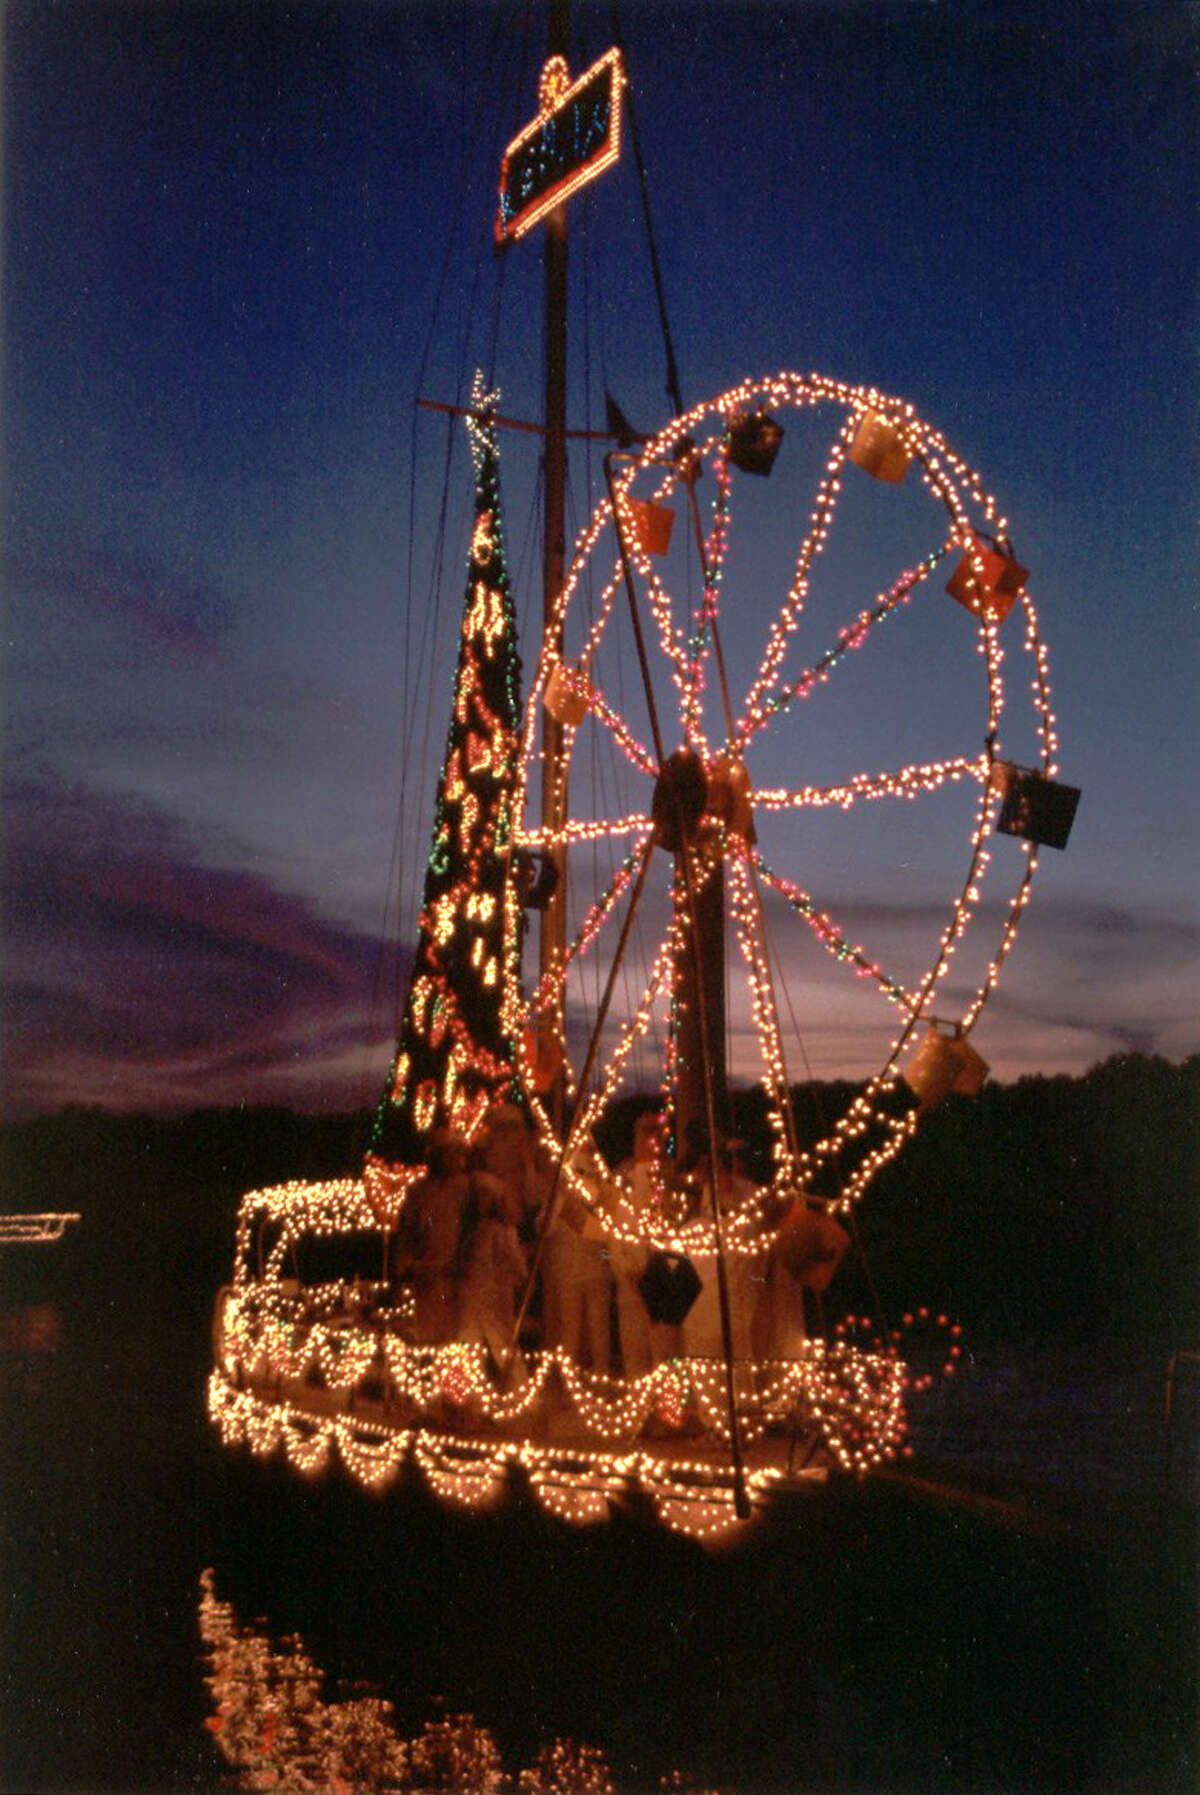 More than 100 boats are expected to take part in the Christmas Boat Parade on the Clear Lake channel.